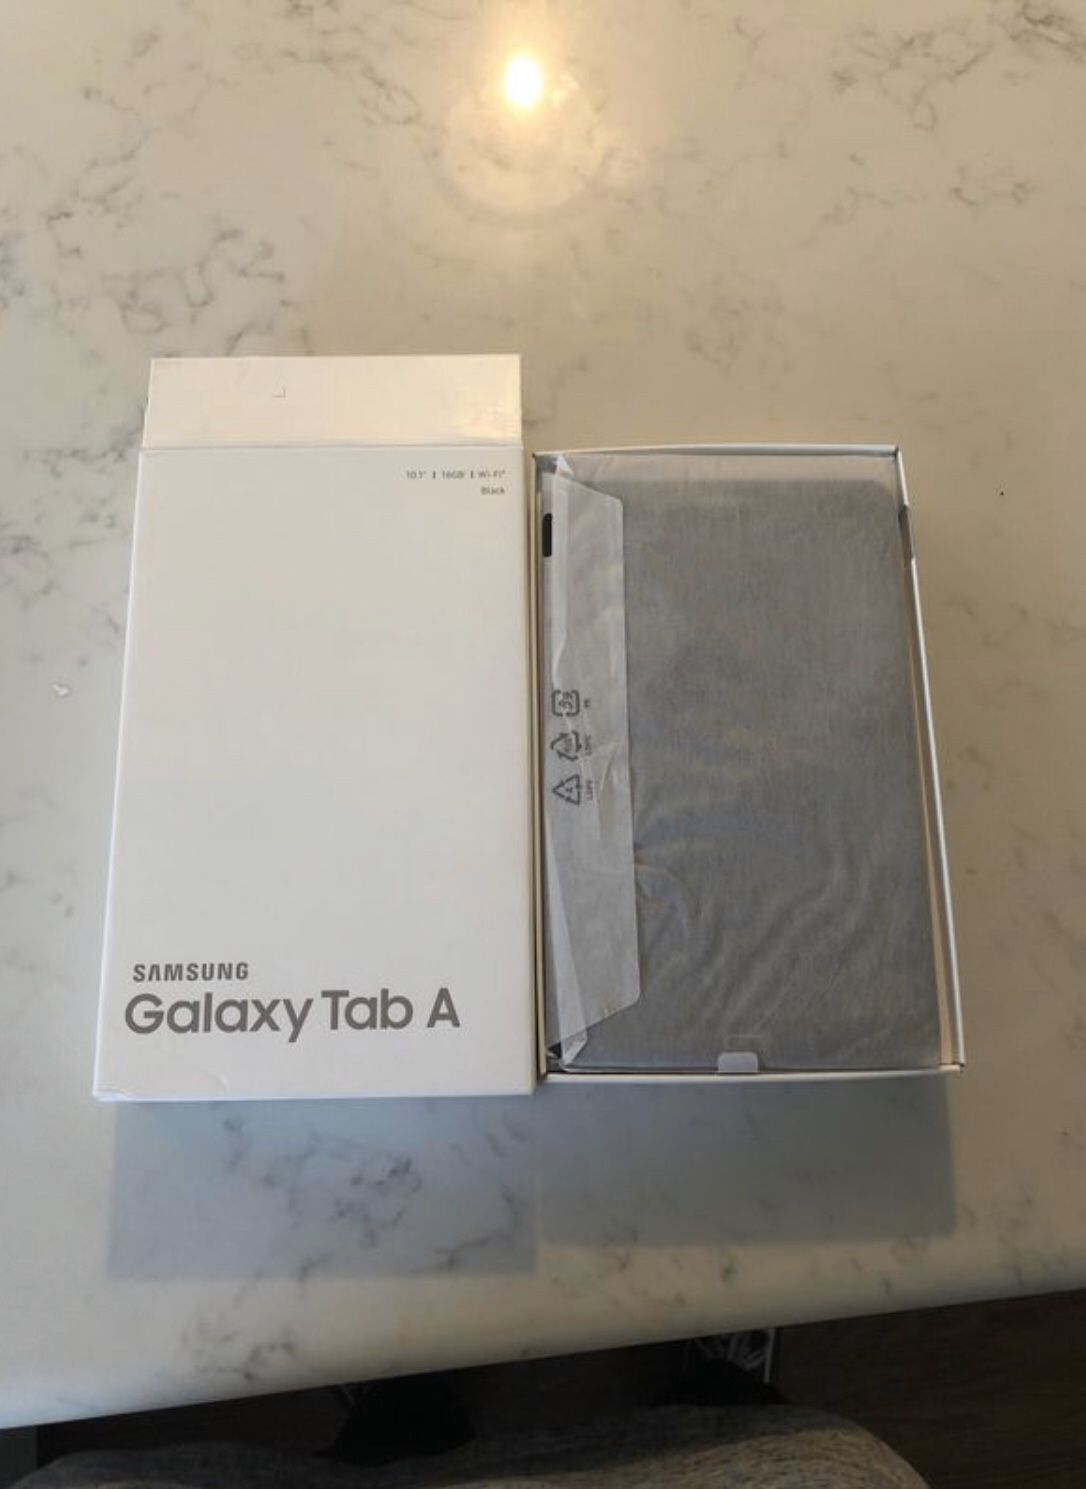 Samsung Galaxy Tablet A with case and wireless headphones